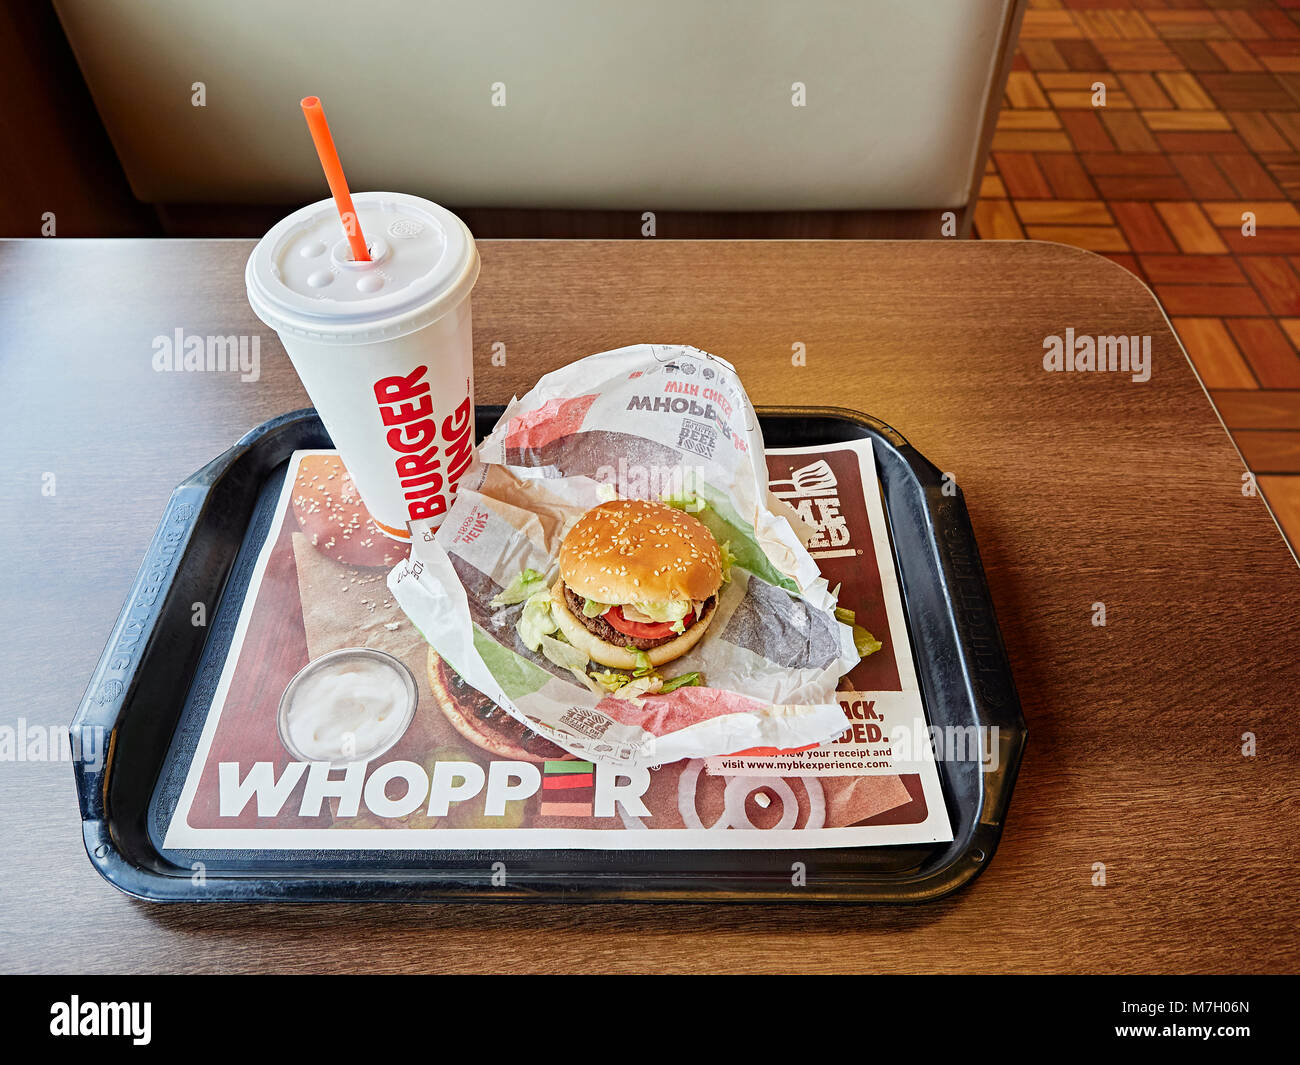 Burger King whopper hamburger and cold drink on the fast food restaurant dinner tray. Stock Photo